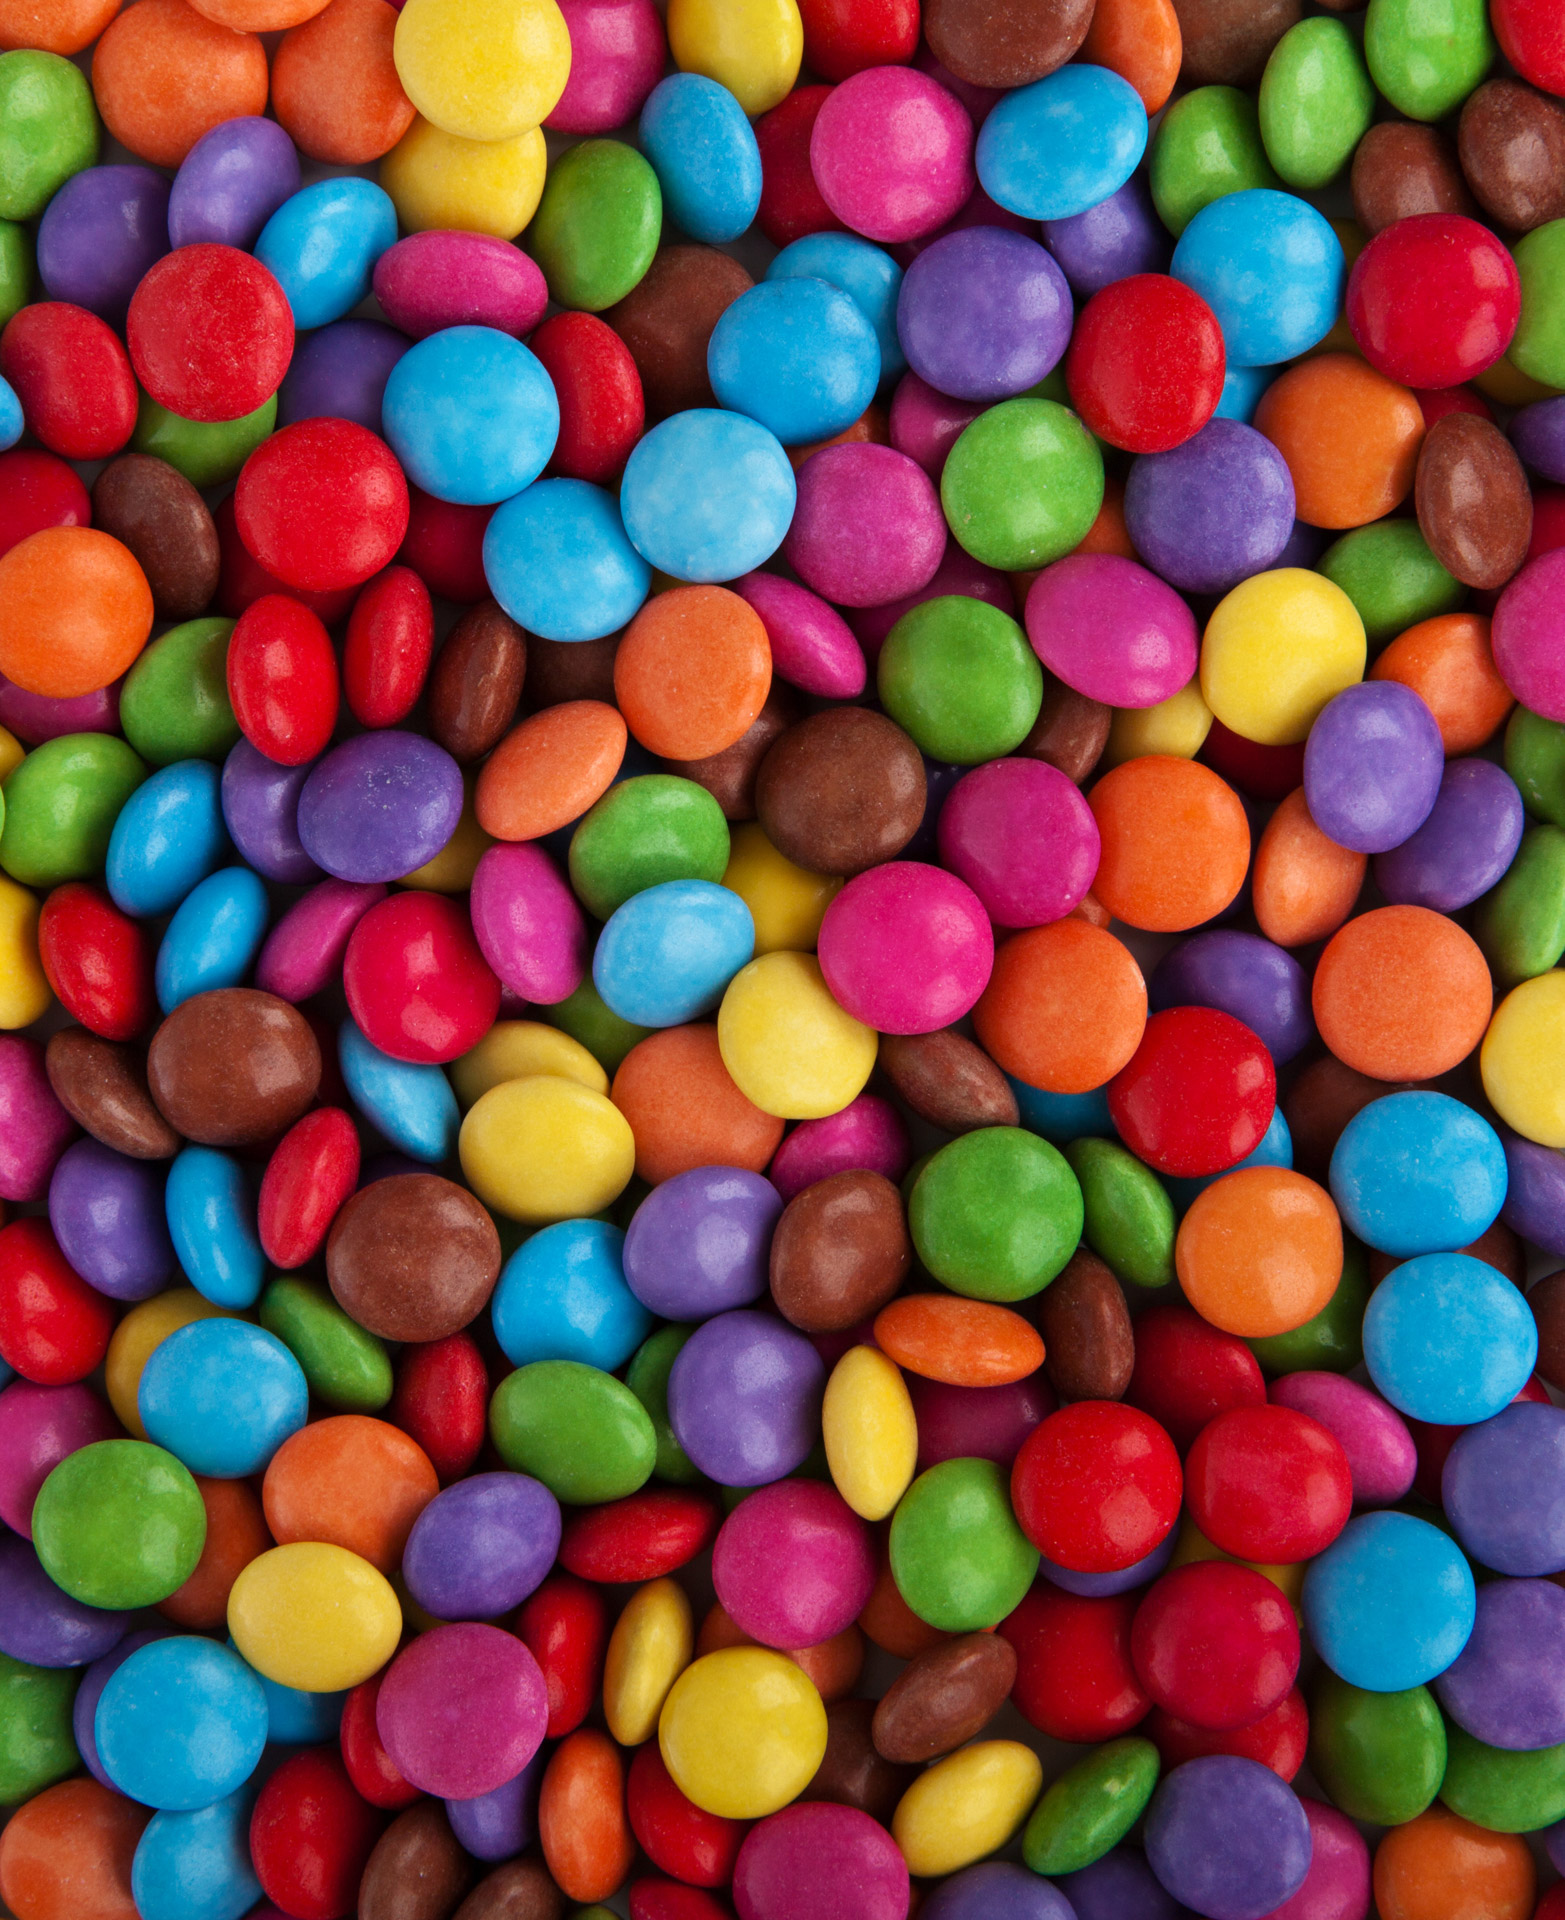 Colorful Chocolate Buttons